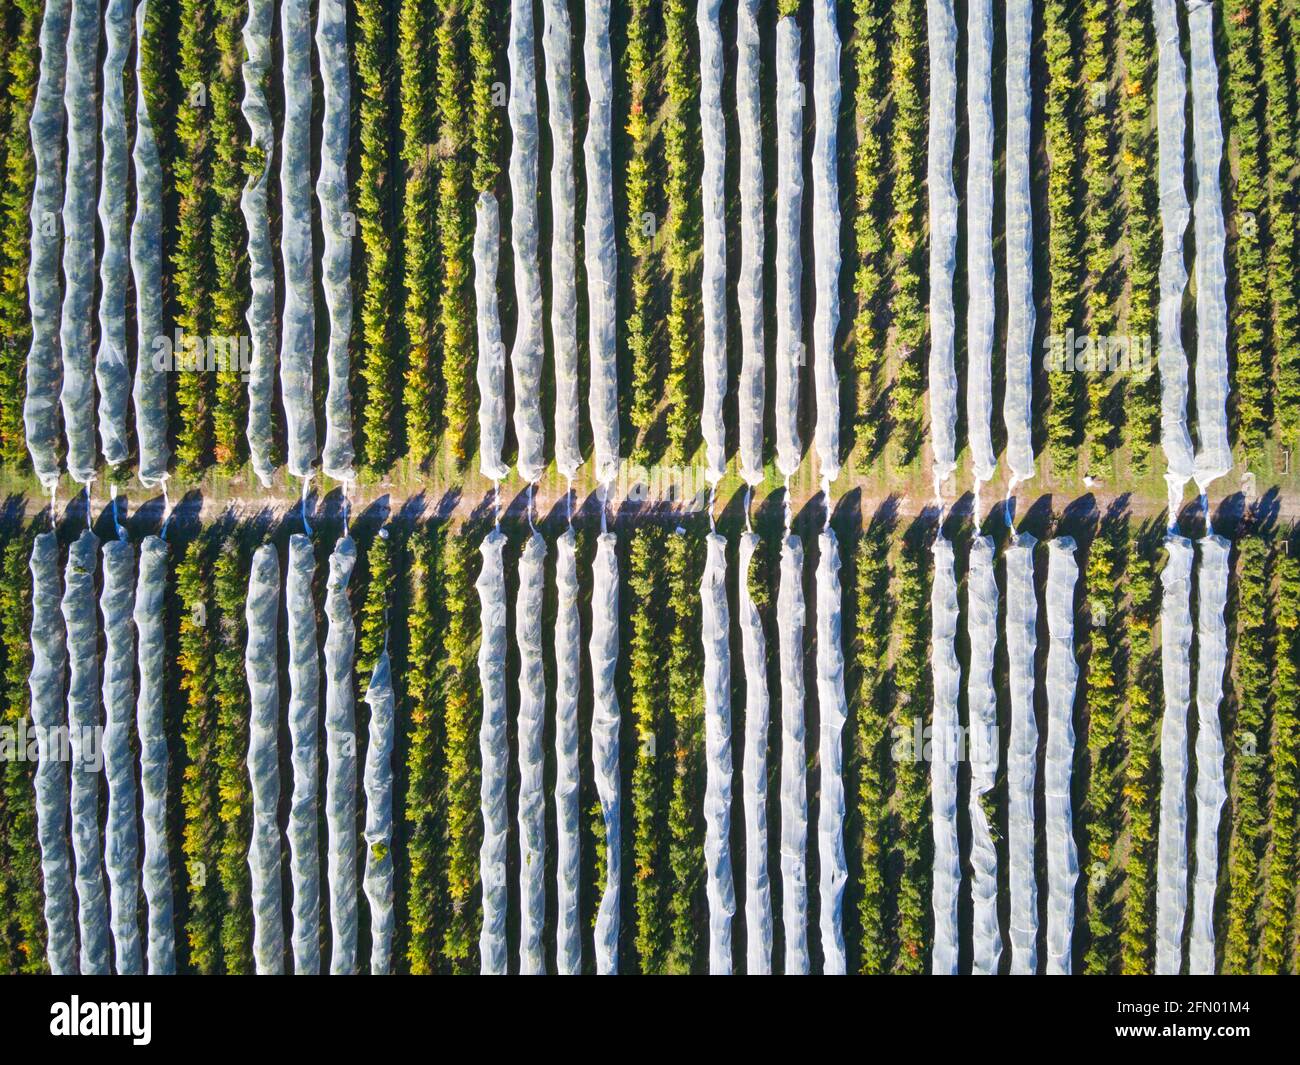 Apple orchard aerial view showing lines of apples and protective netting, Harcourt, Victoria, Australia. Stock Photo